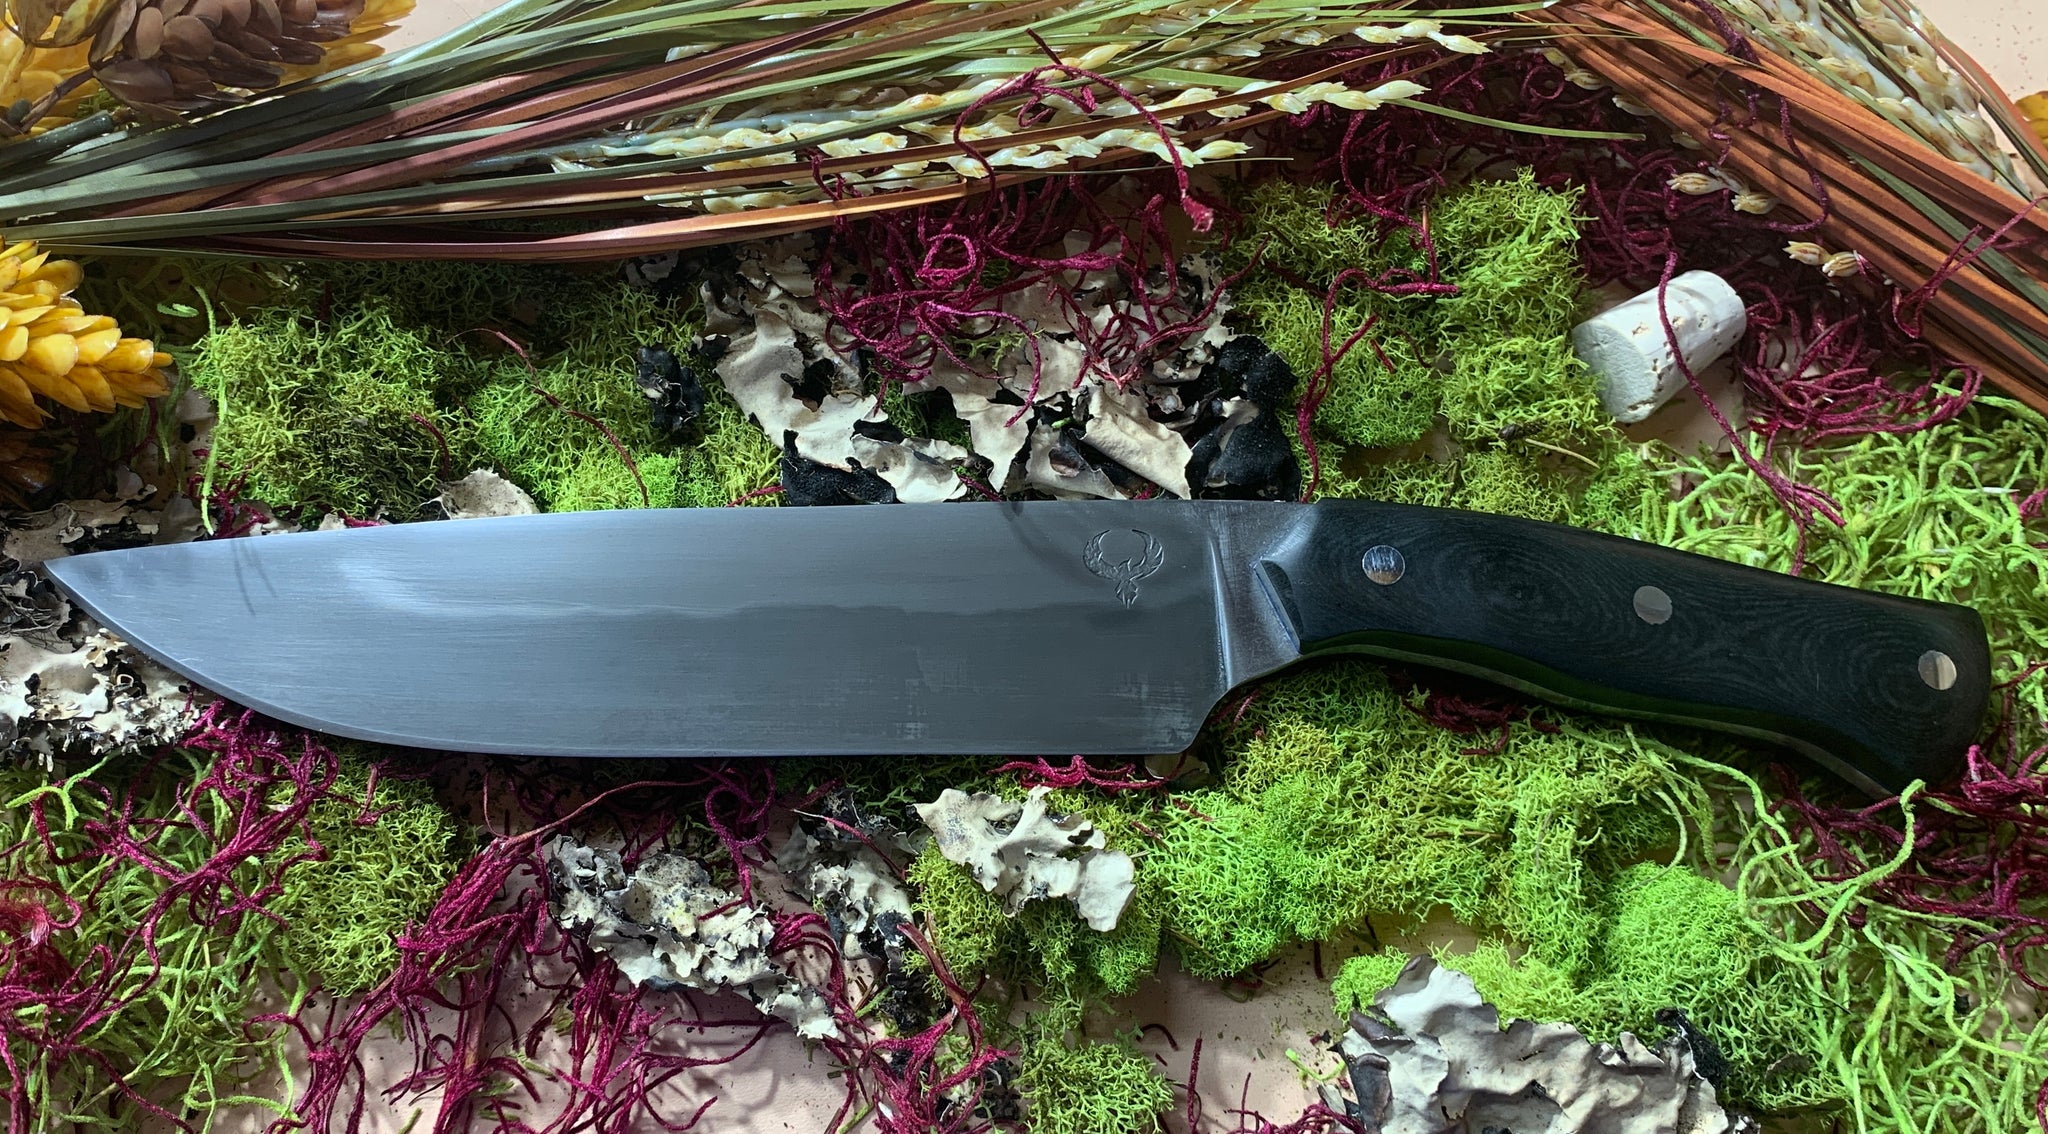 All About 80CrV2 Knife Steel at